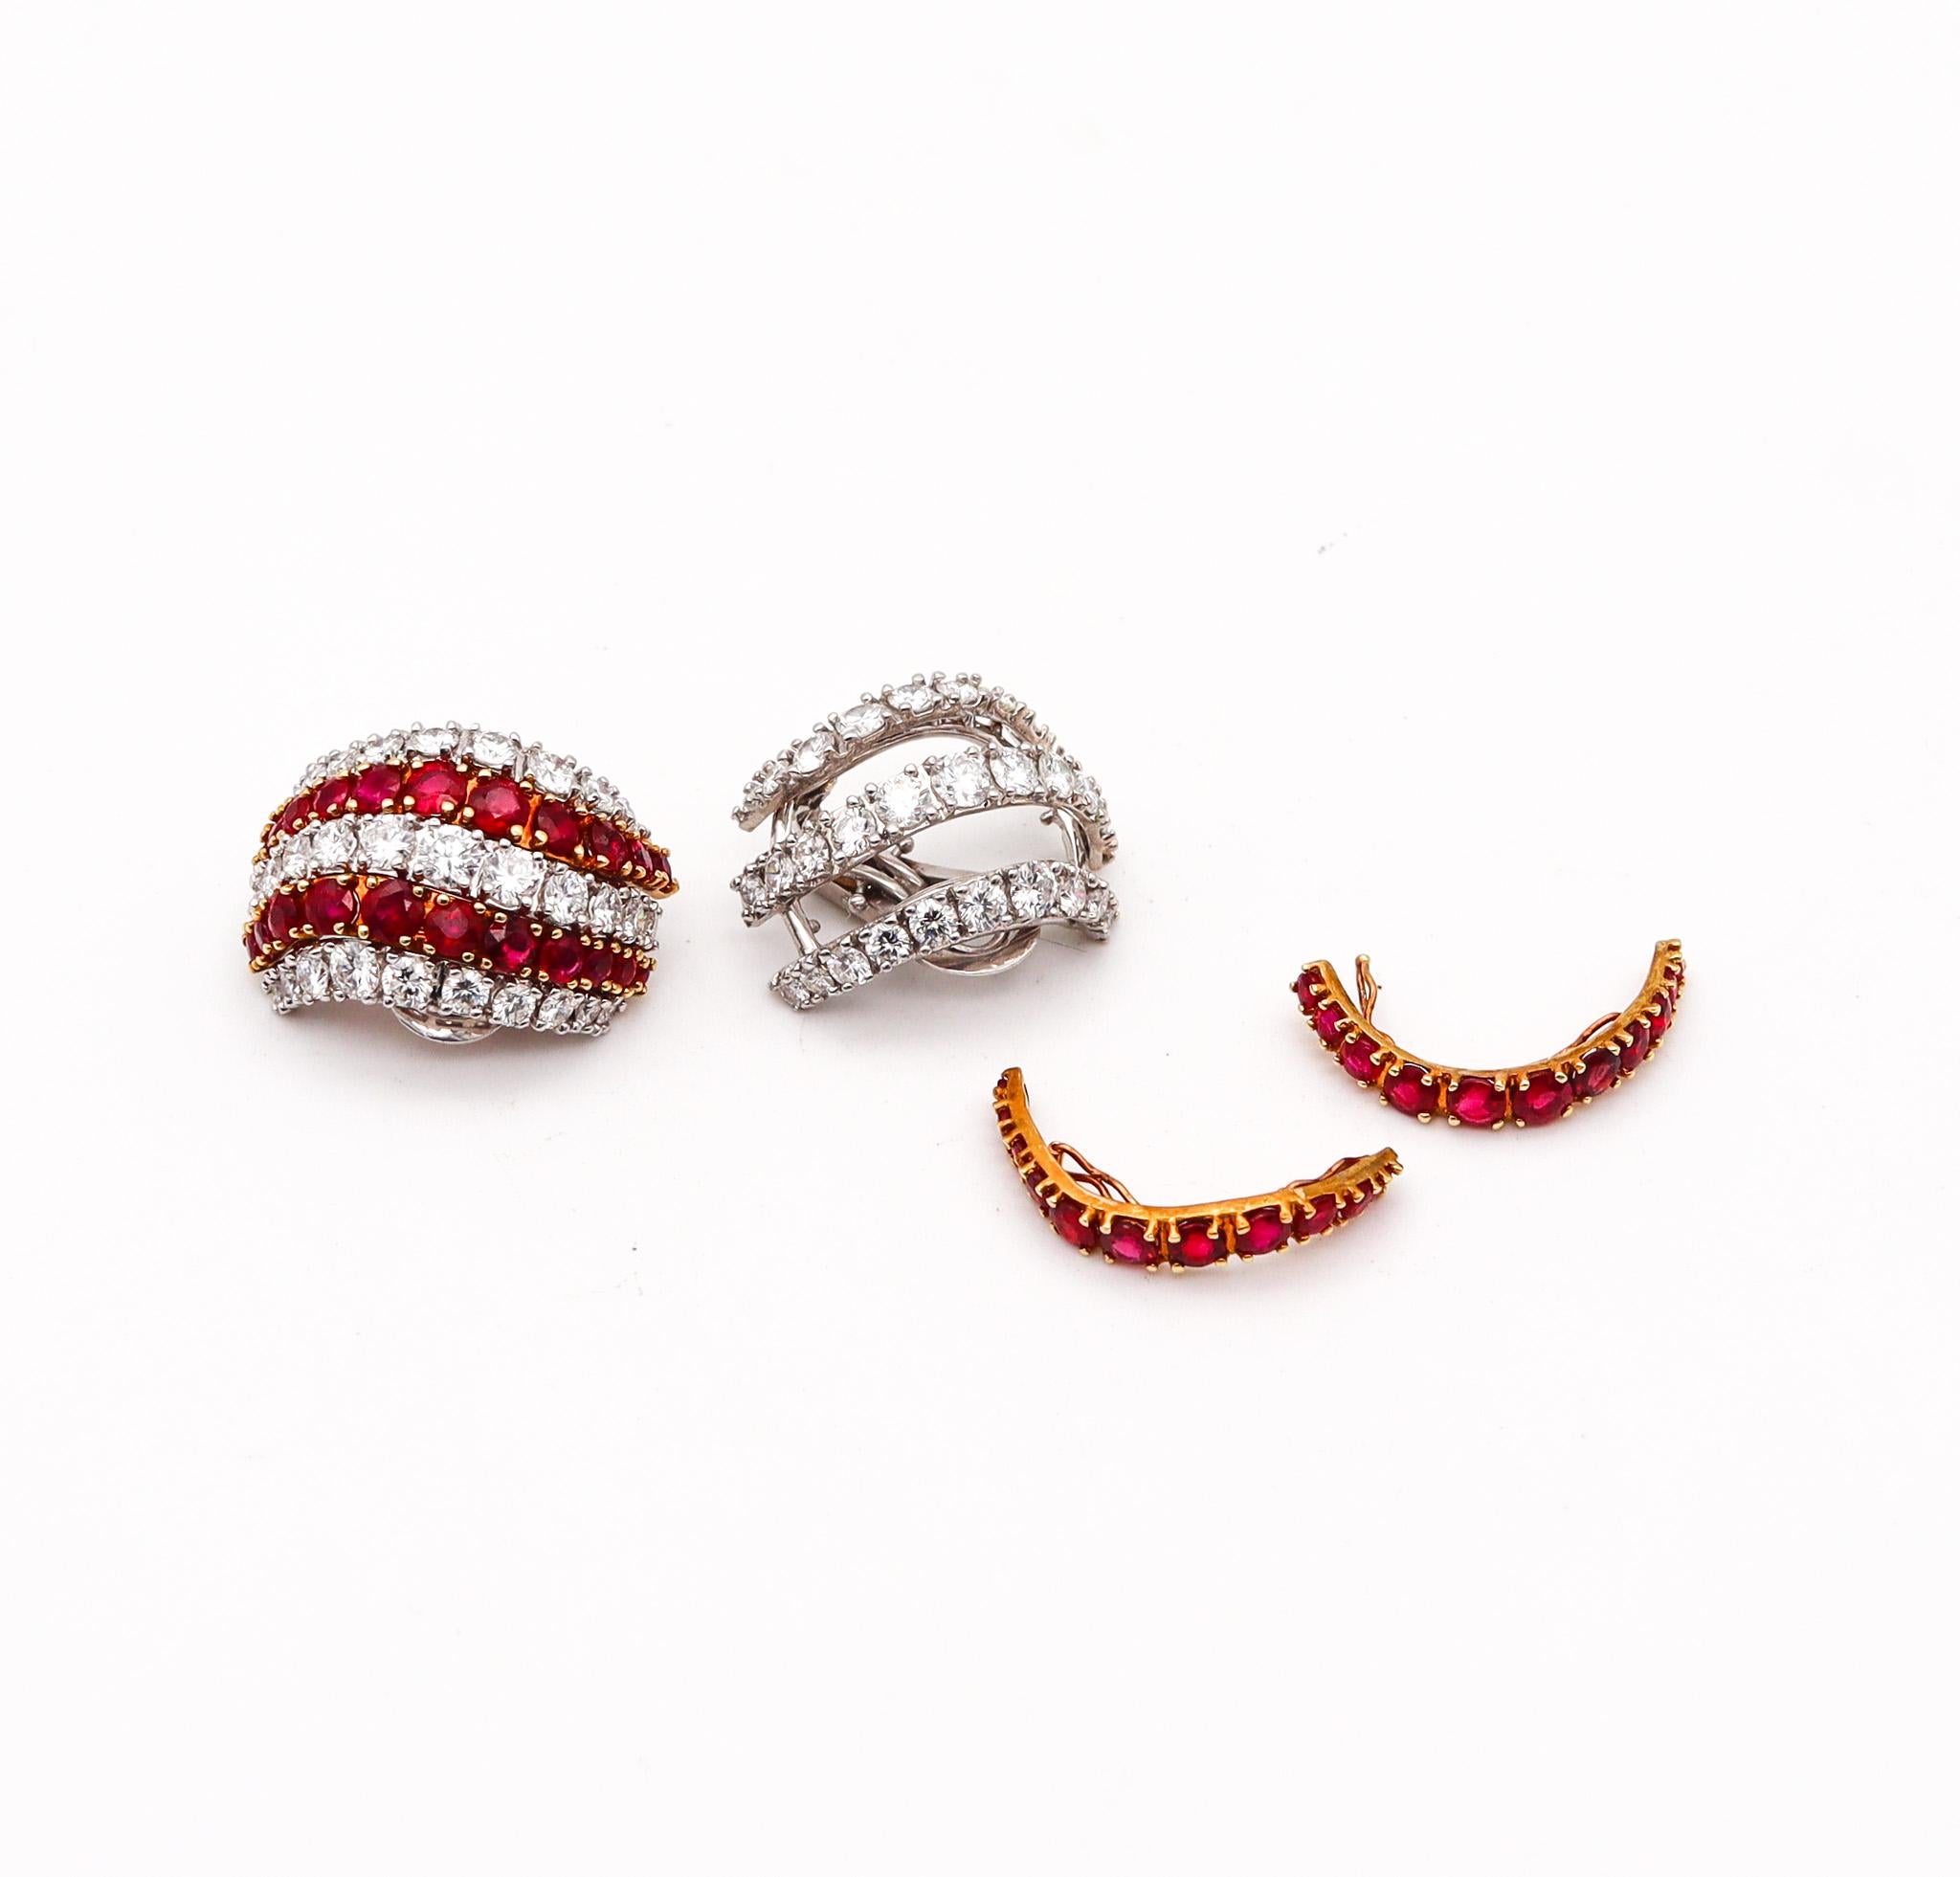 Kutchinsky 1970 Clip Earrings 18Kt Gold Platinum And 21.02 Ctw Diamonds & Rubies For Sale 1